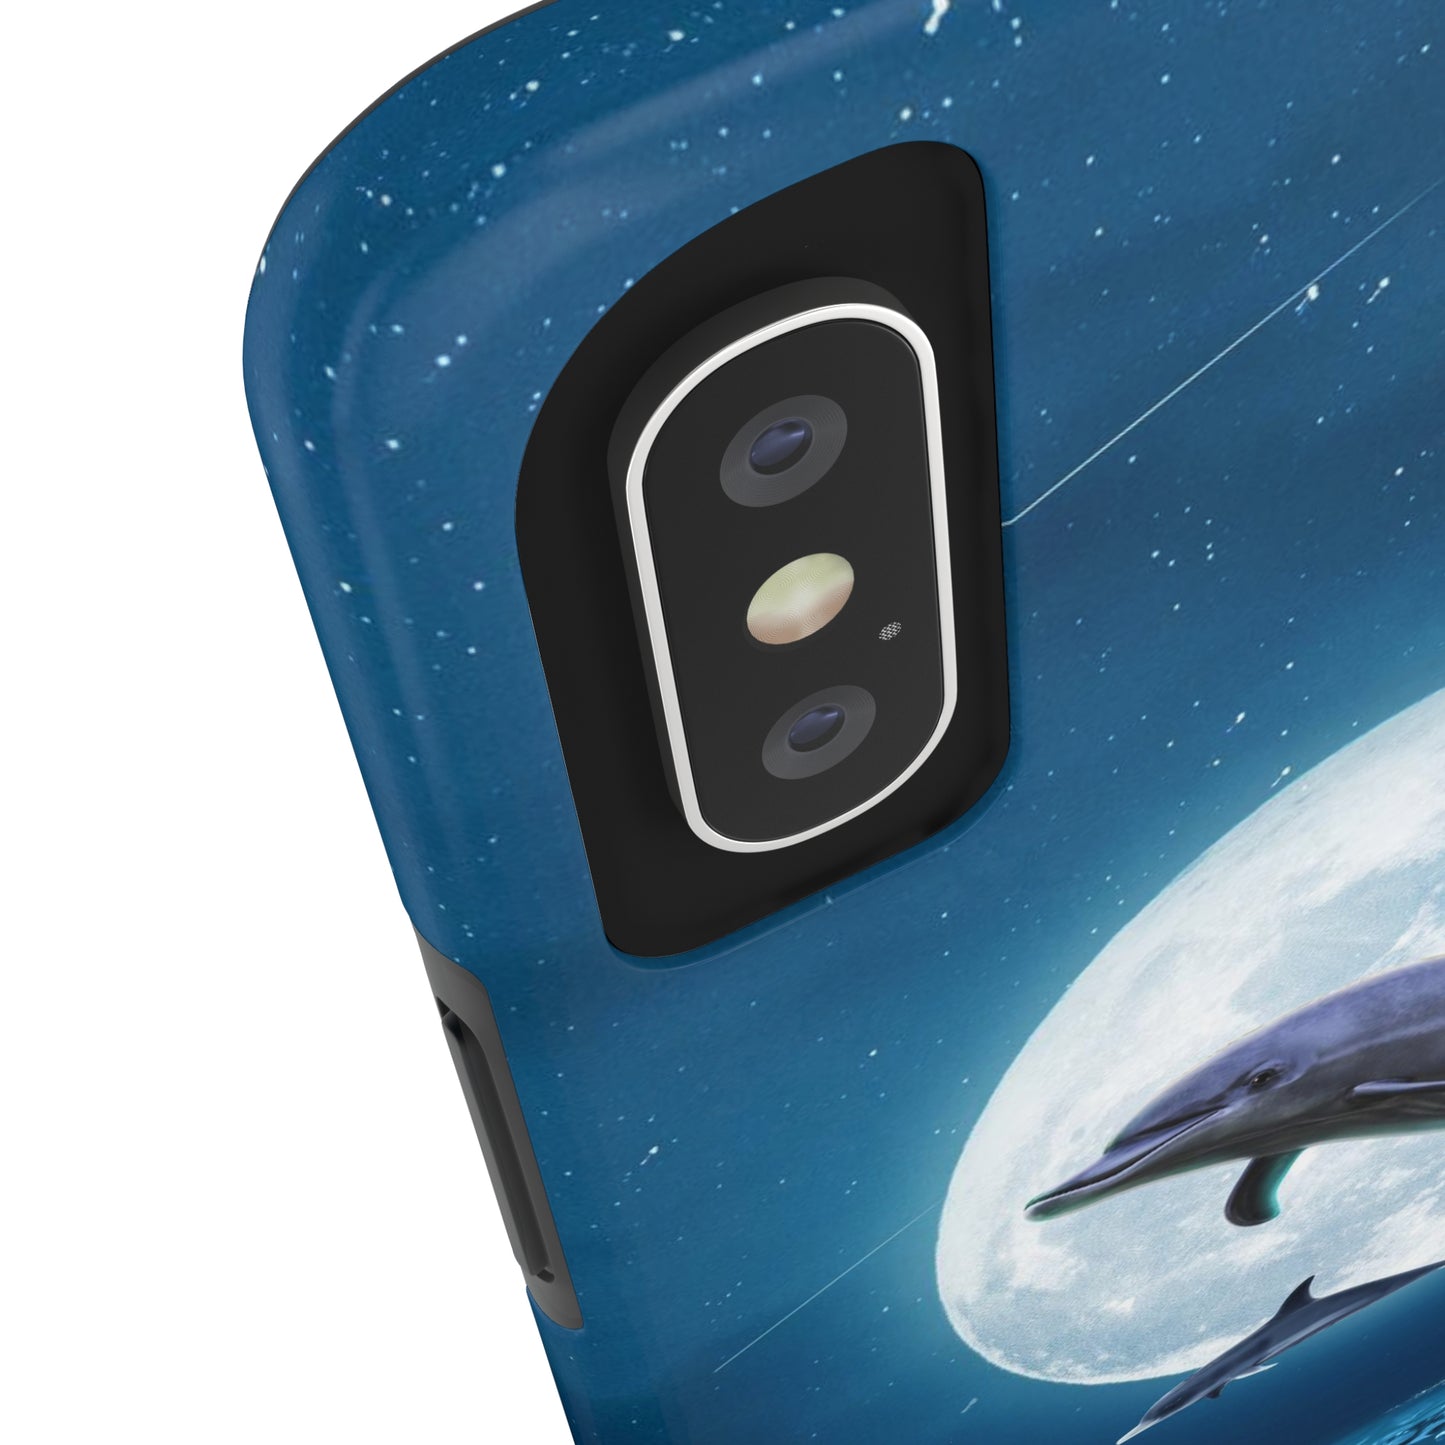 Dolphin over the moon  - Tough Phone Cases